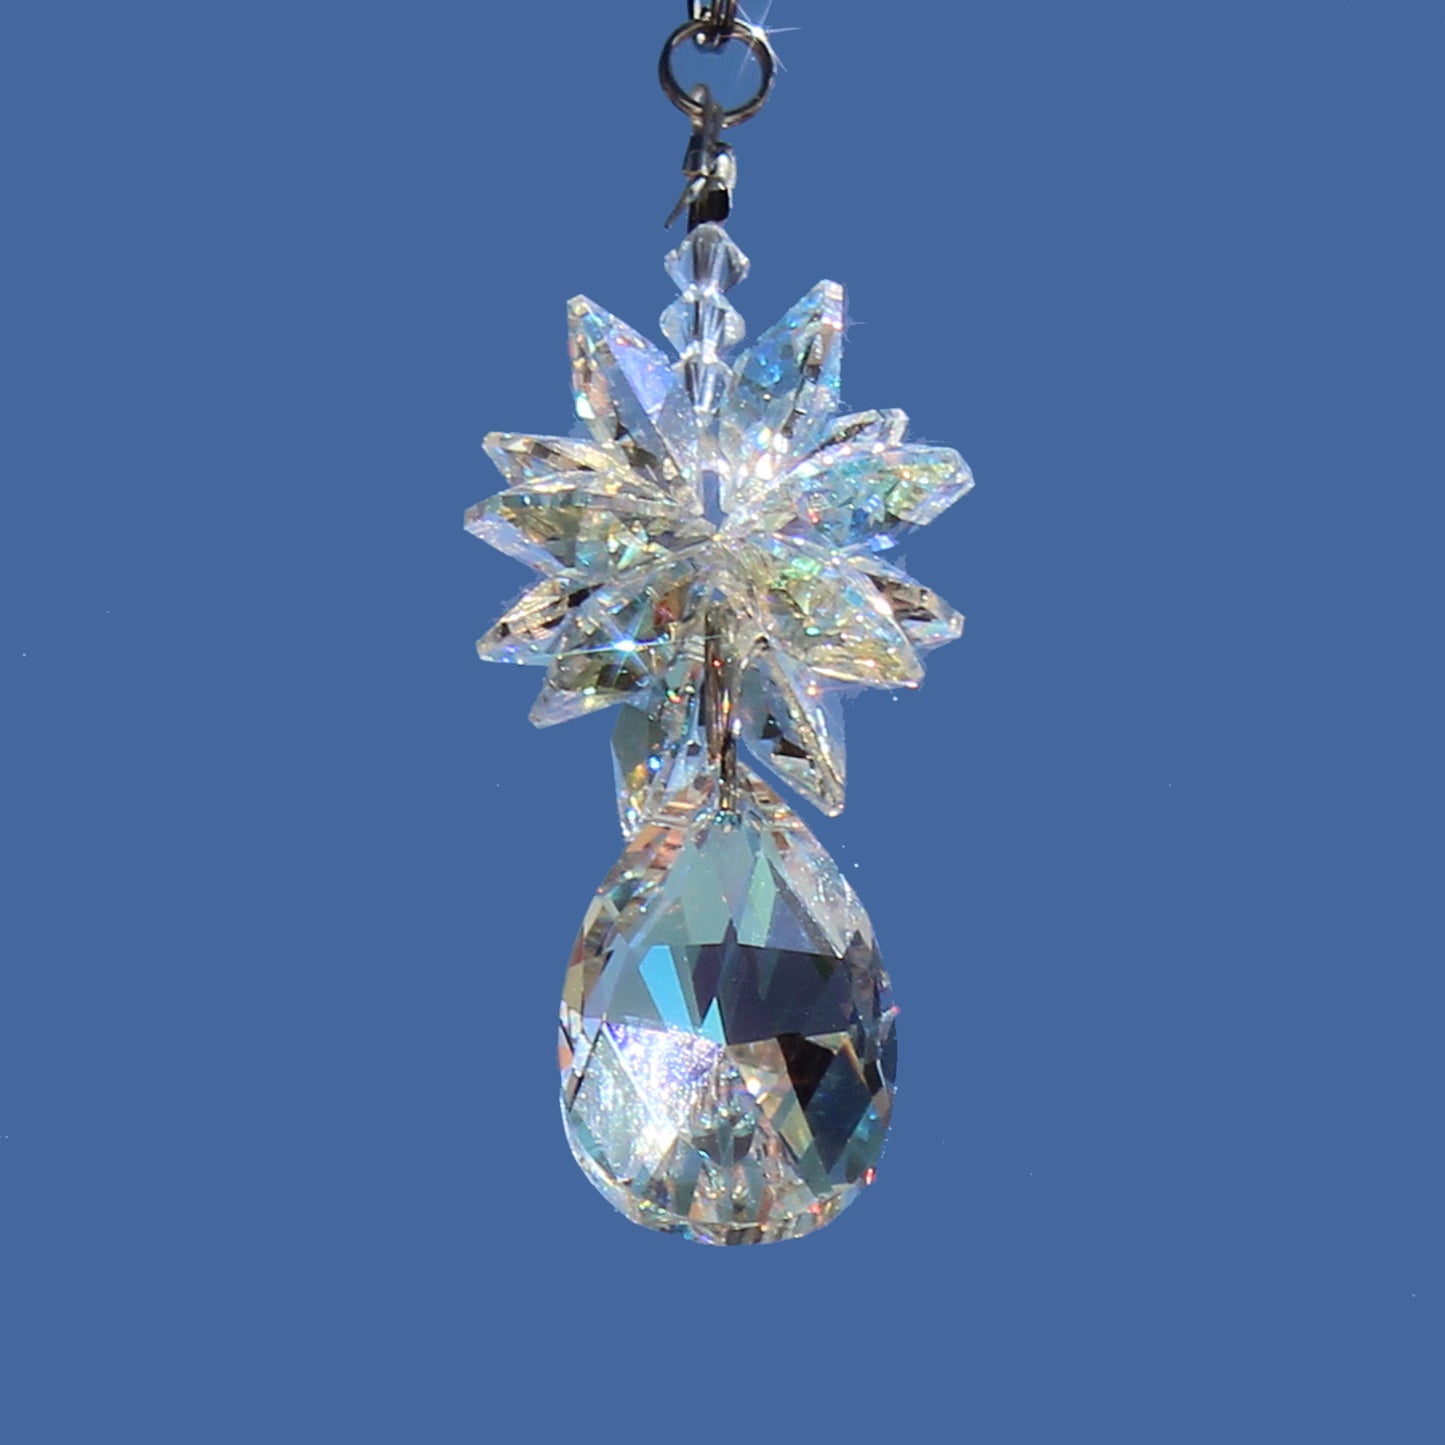 Sunlight Catcher, Personalized Window Suncatcher, Forget Me Not Ornament, Rainbow Maker With Swarovski Crystals & Prism, Almond Crystal Cluster